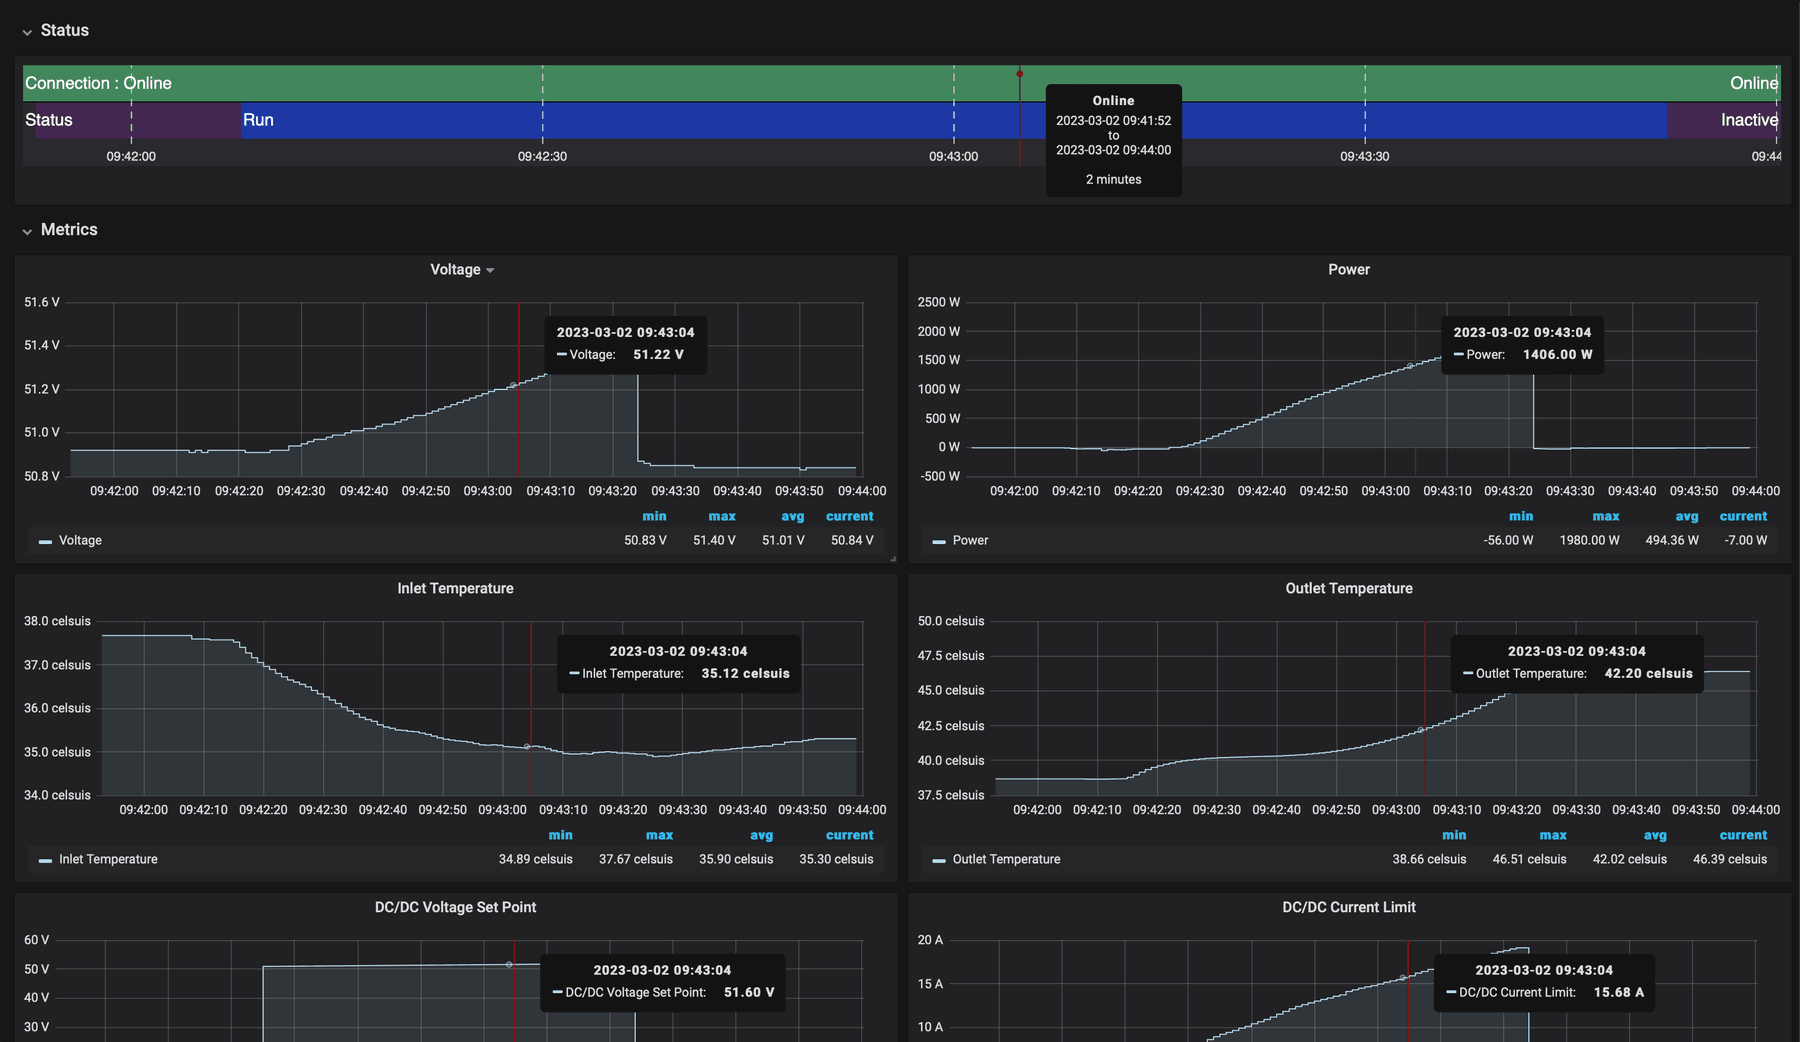 Enapter Cloud dashboard with historical data.